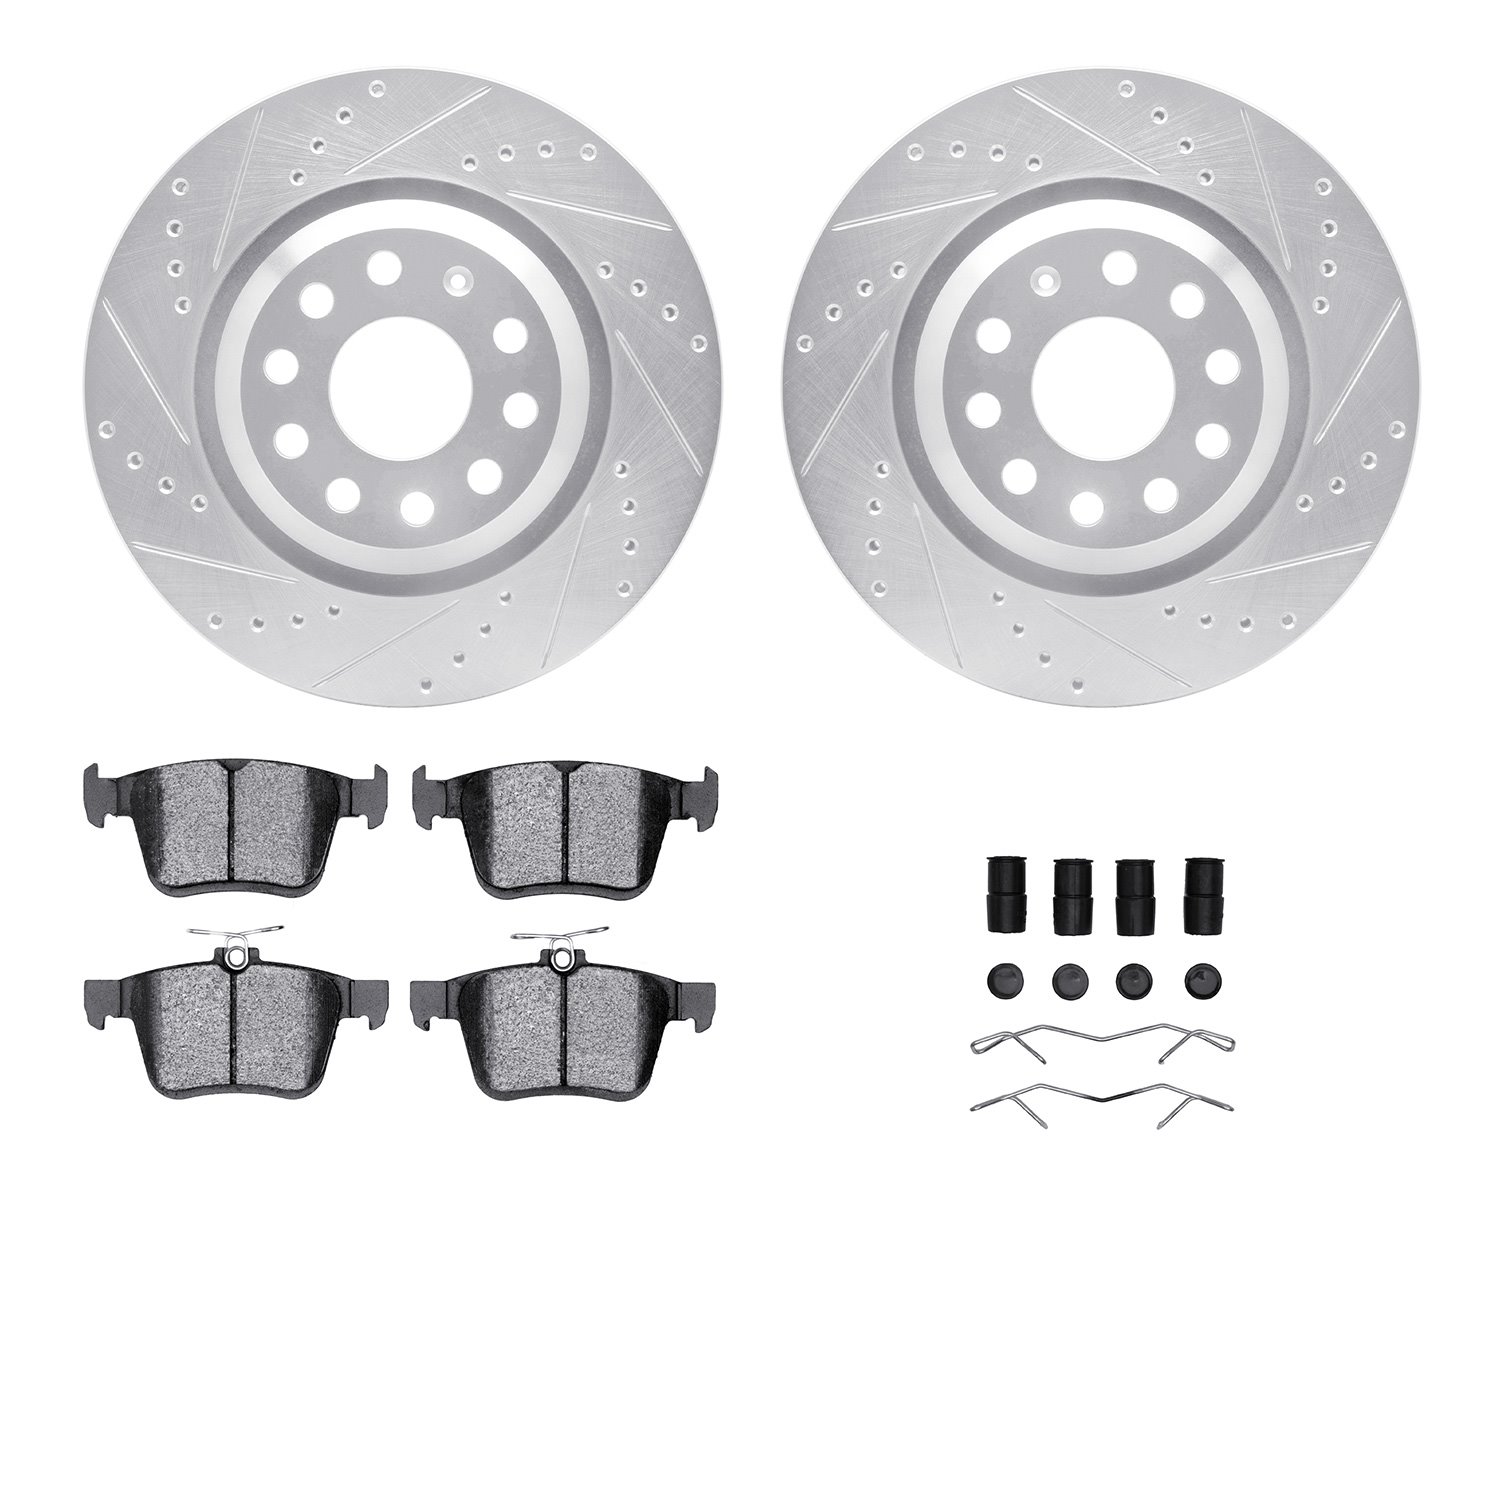 7512-74060 Drilled/Slotted Brake Rotors w/5000 Advanced Brake Pads Kit & Hardware [Silver], Fits Select Audi/Volkswagen, Positio